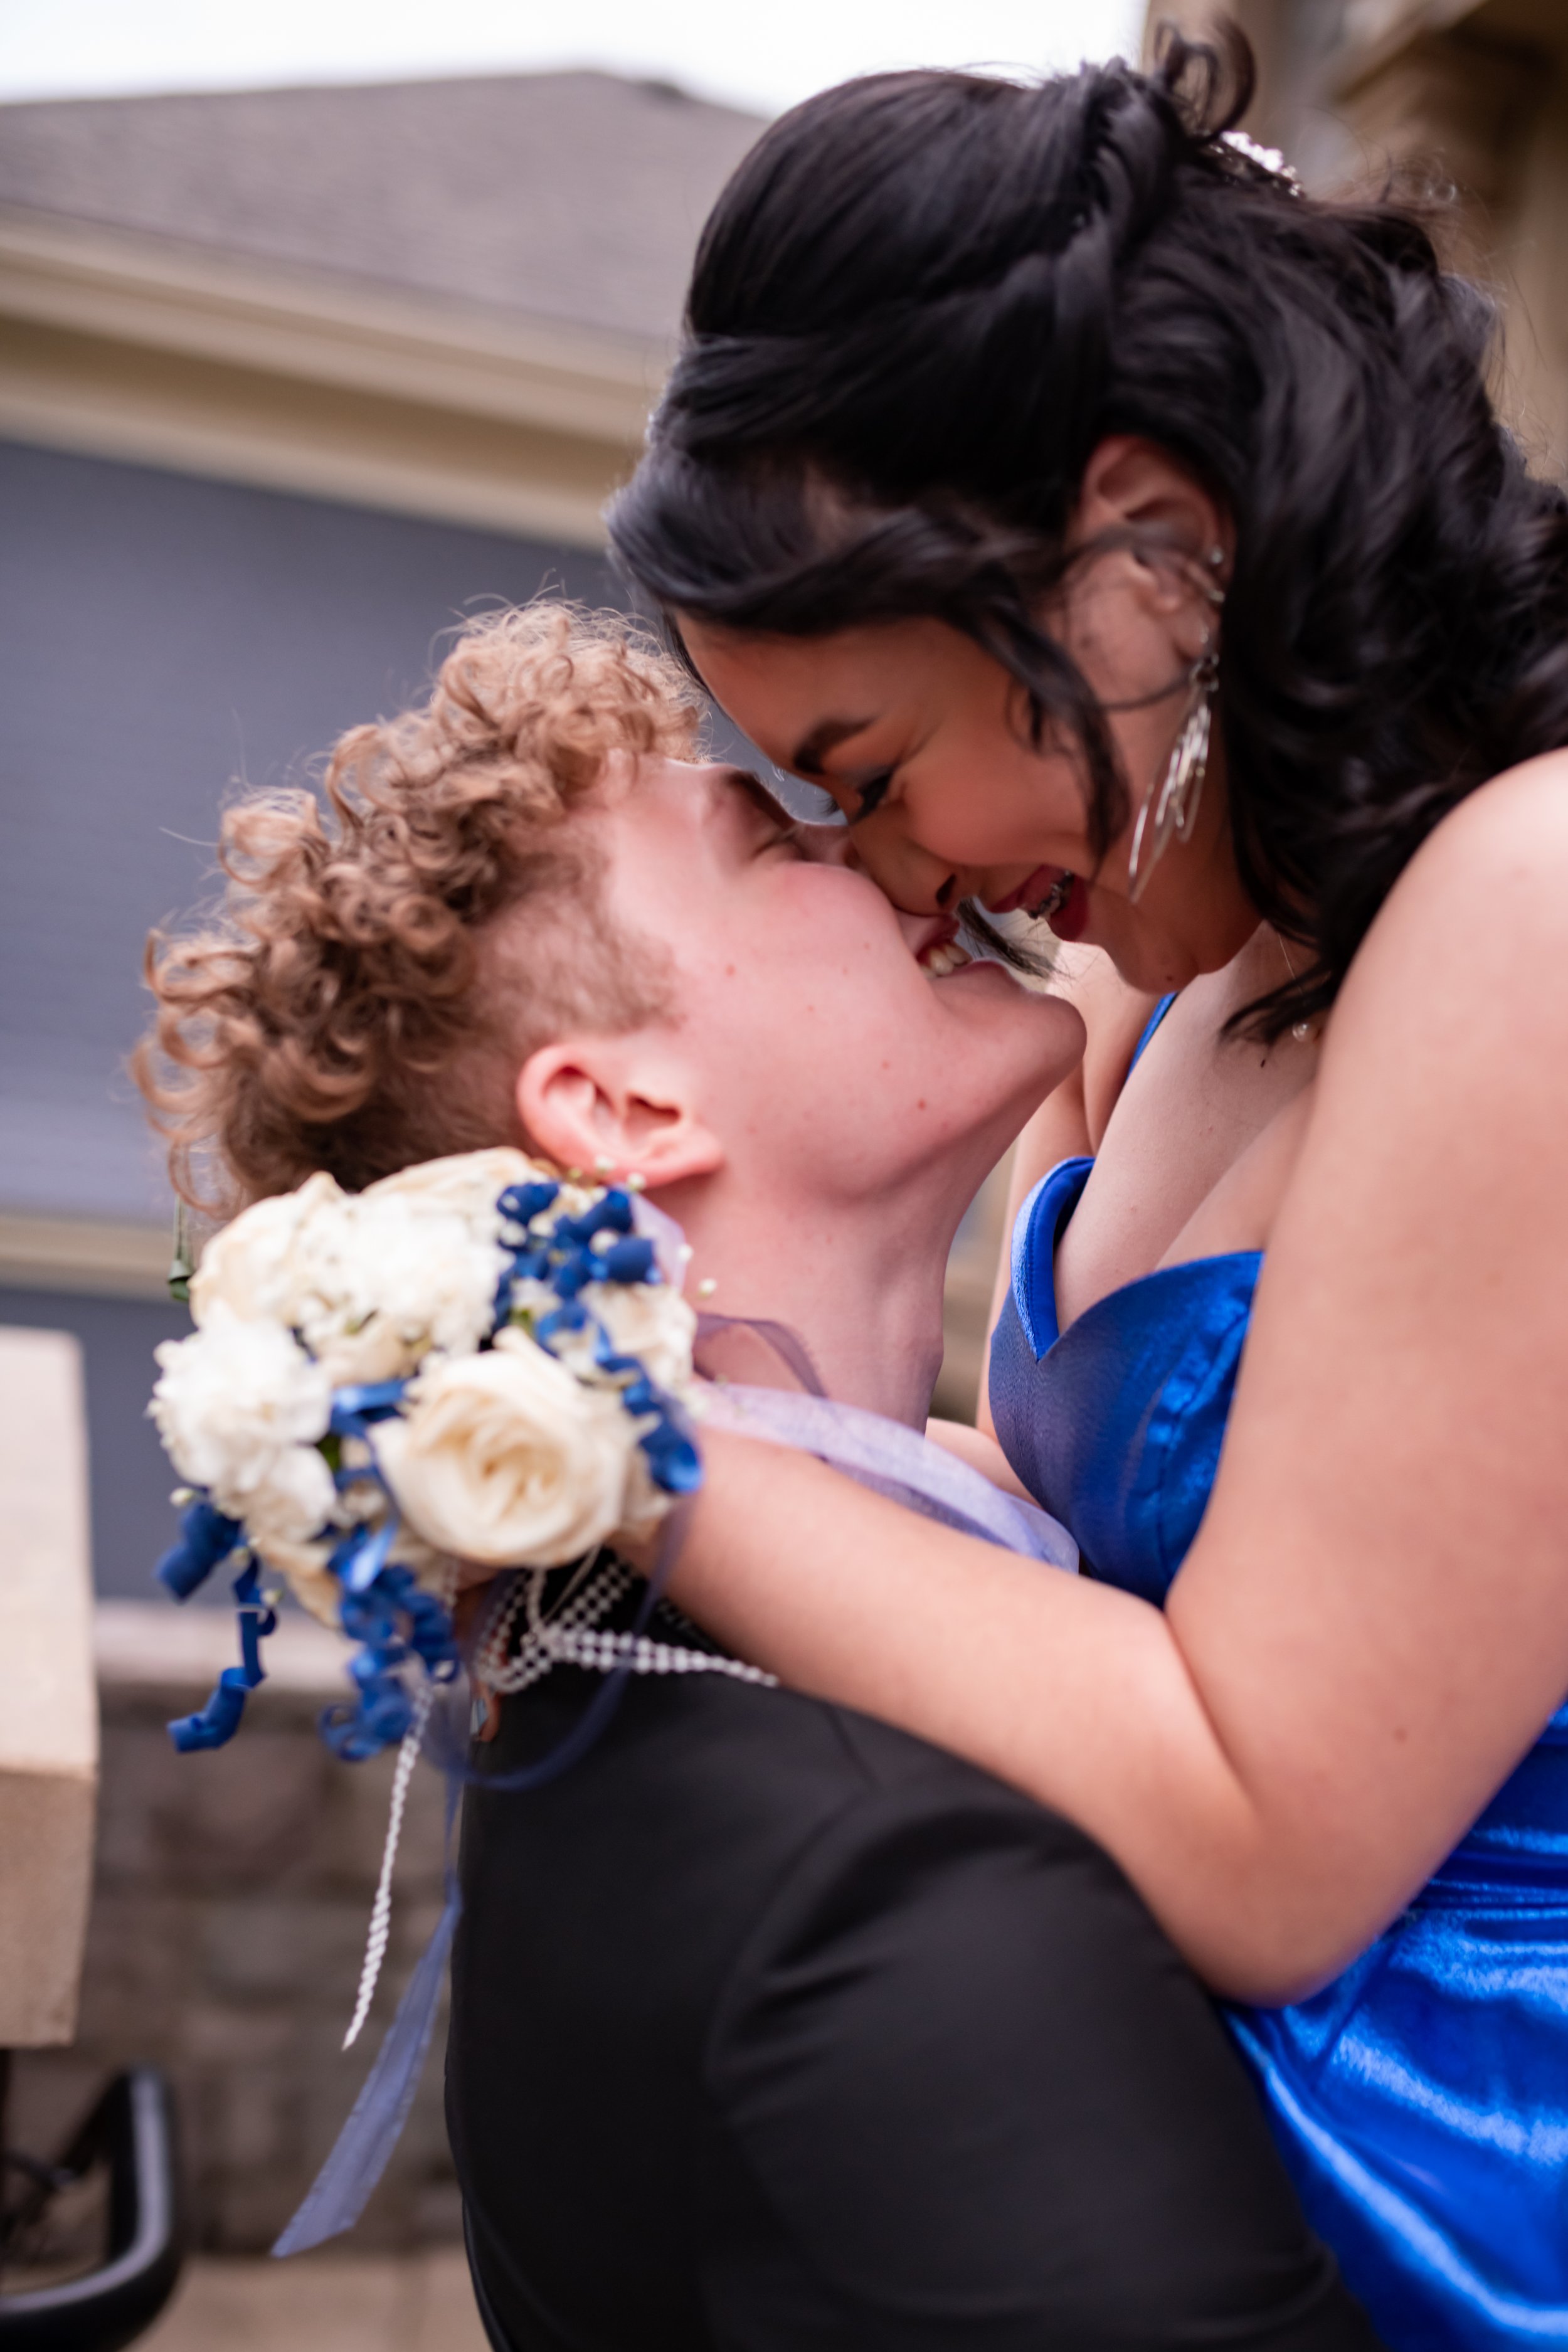 Pose like a rock star: best ideas for fun yet classy Prom pictures